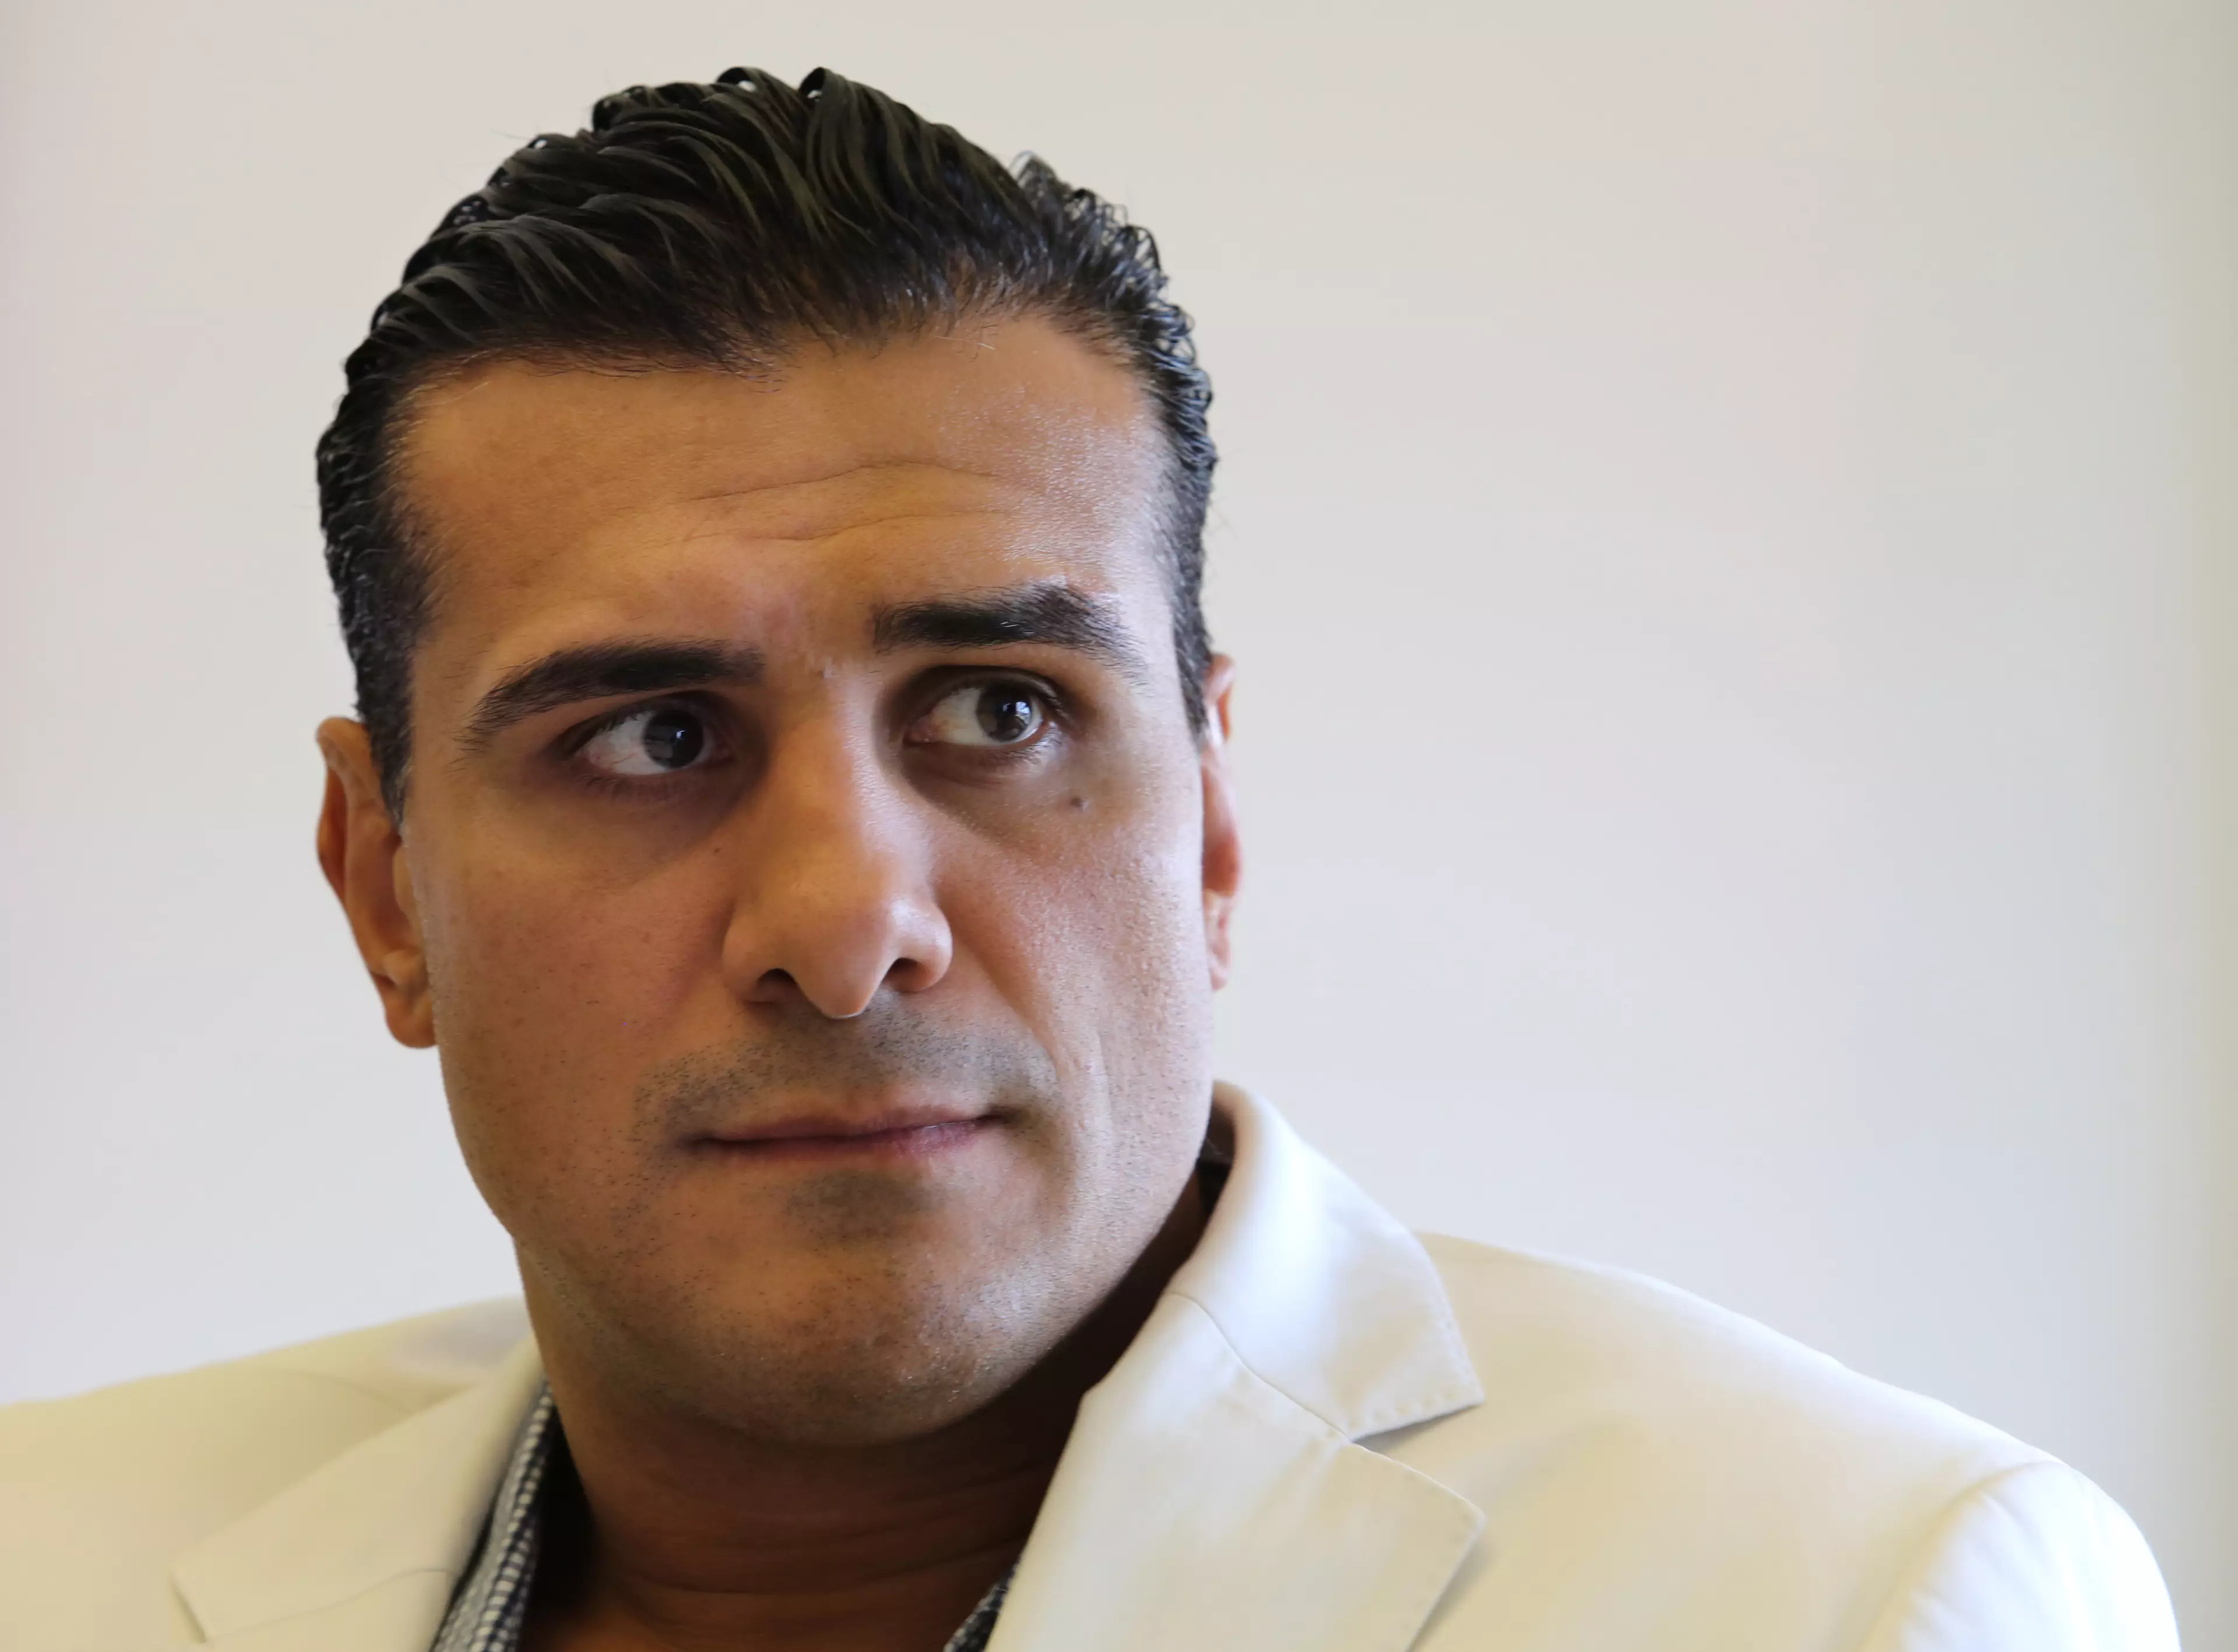 Former WWE Wrestler Alberto Del Rio Reveals Wounds After Knife Attack